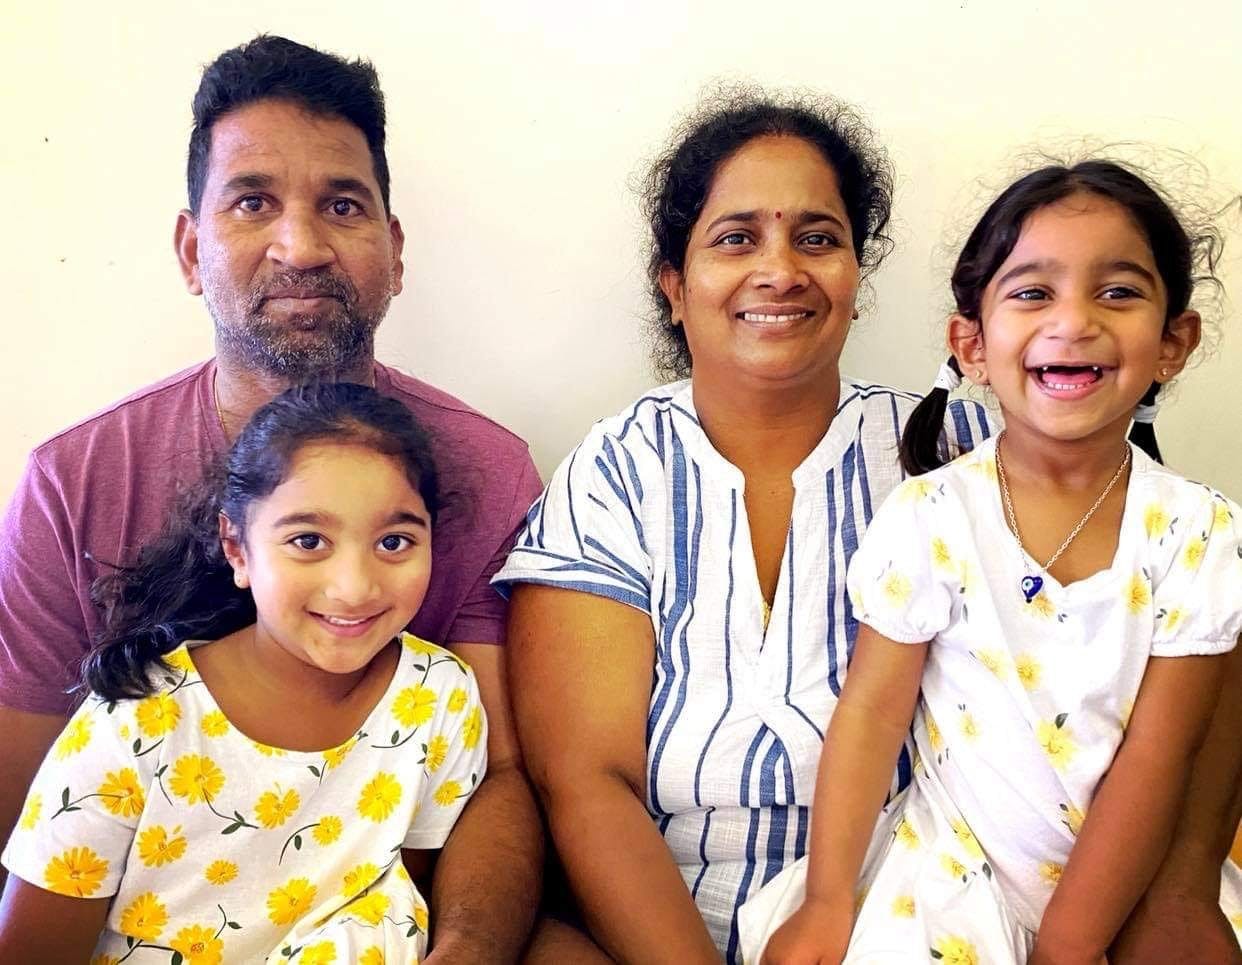 Relief for one Biloela family. But this fight isn’t over